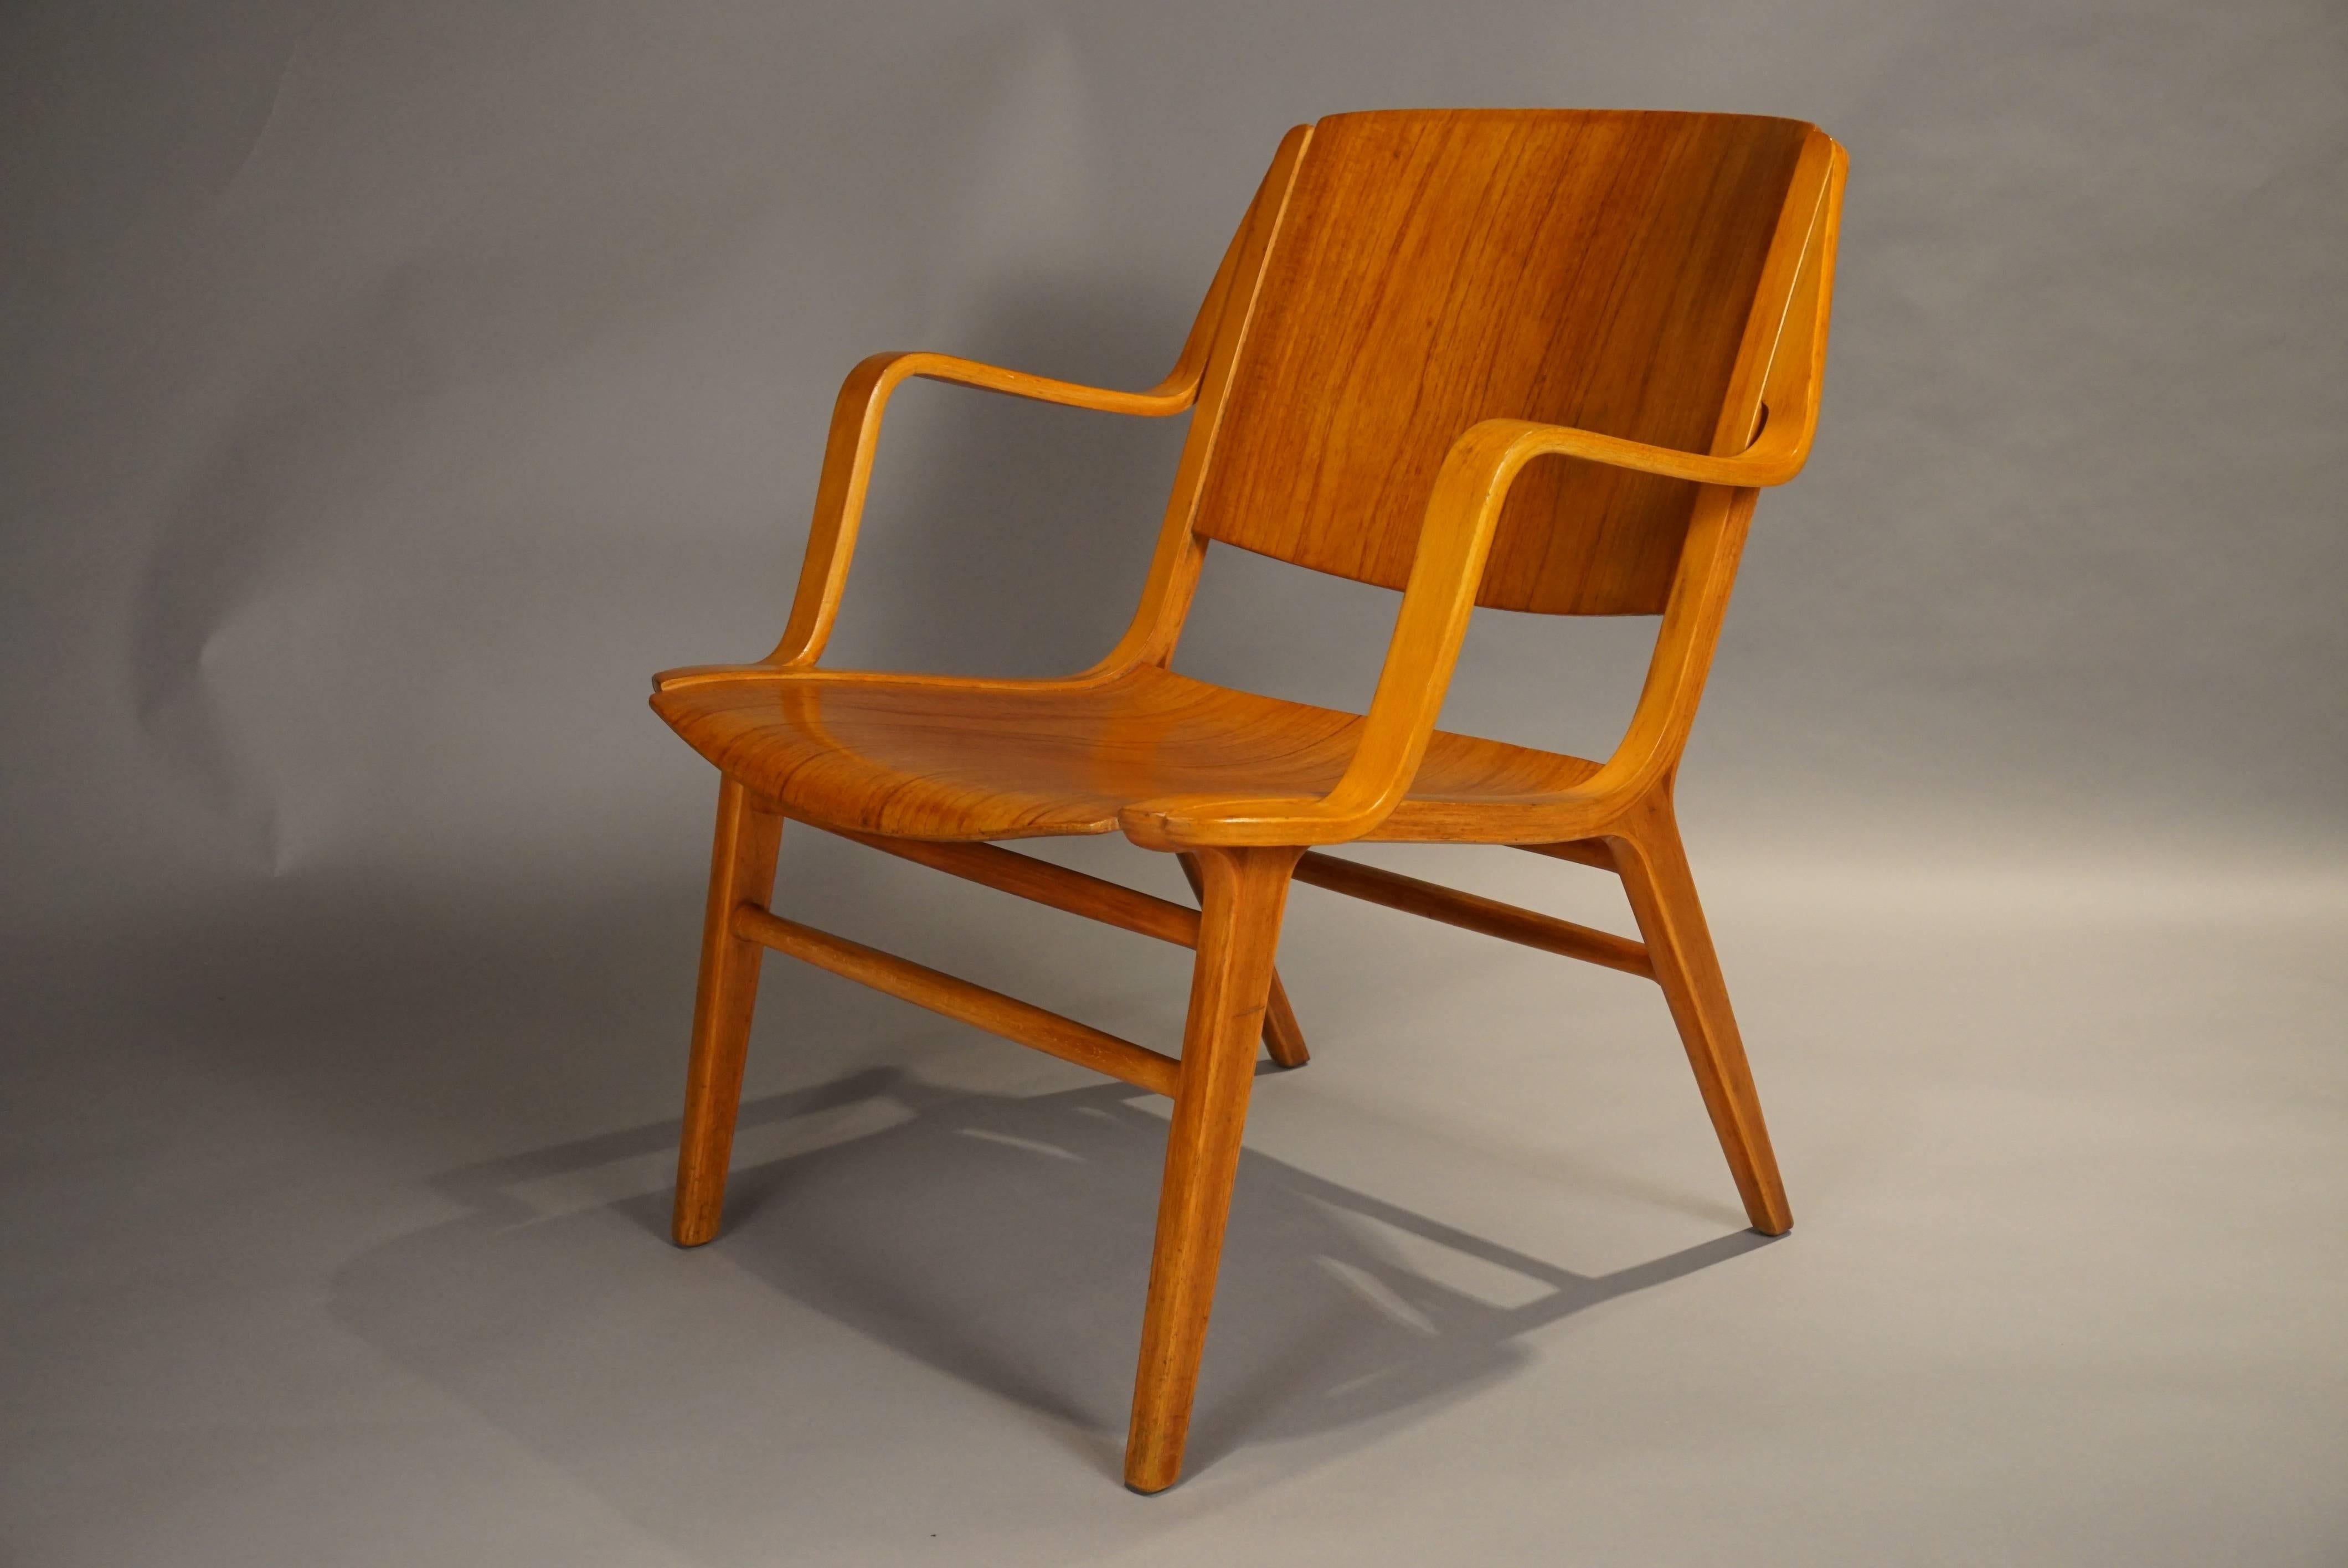 A Classic Danish chair. The chairs are made of beechwood and dark teakwood. Newly polished with a lustrous finish.